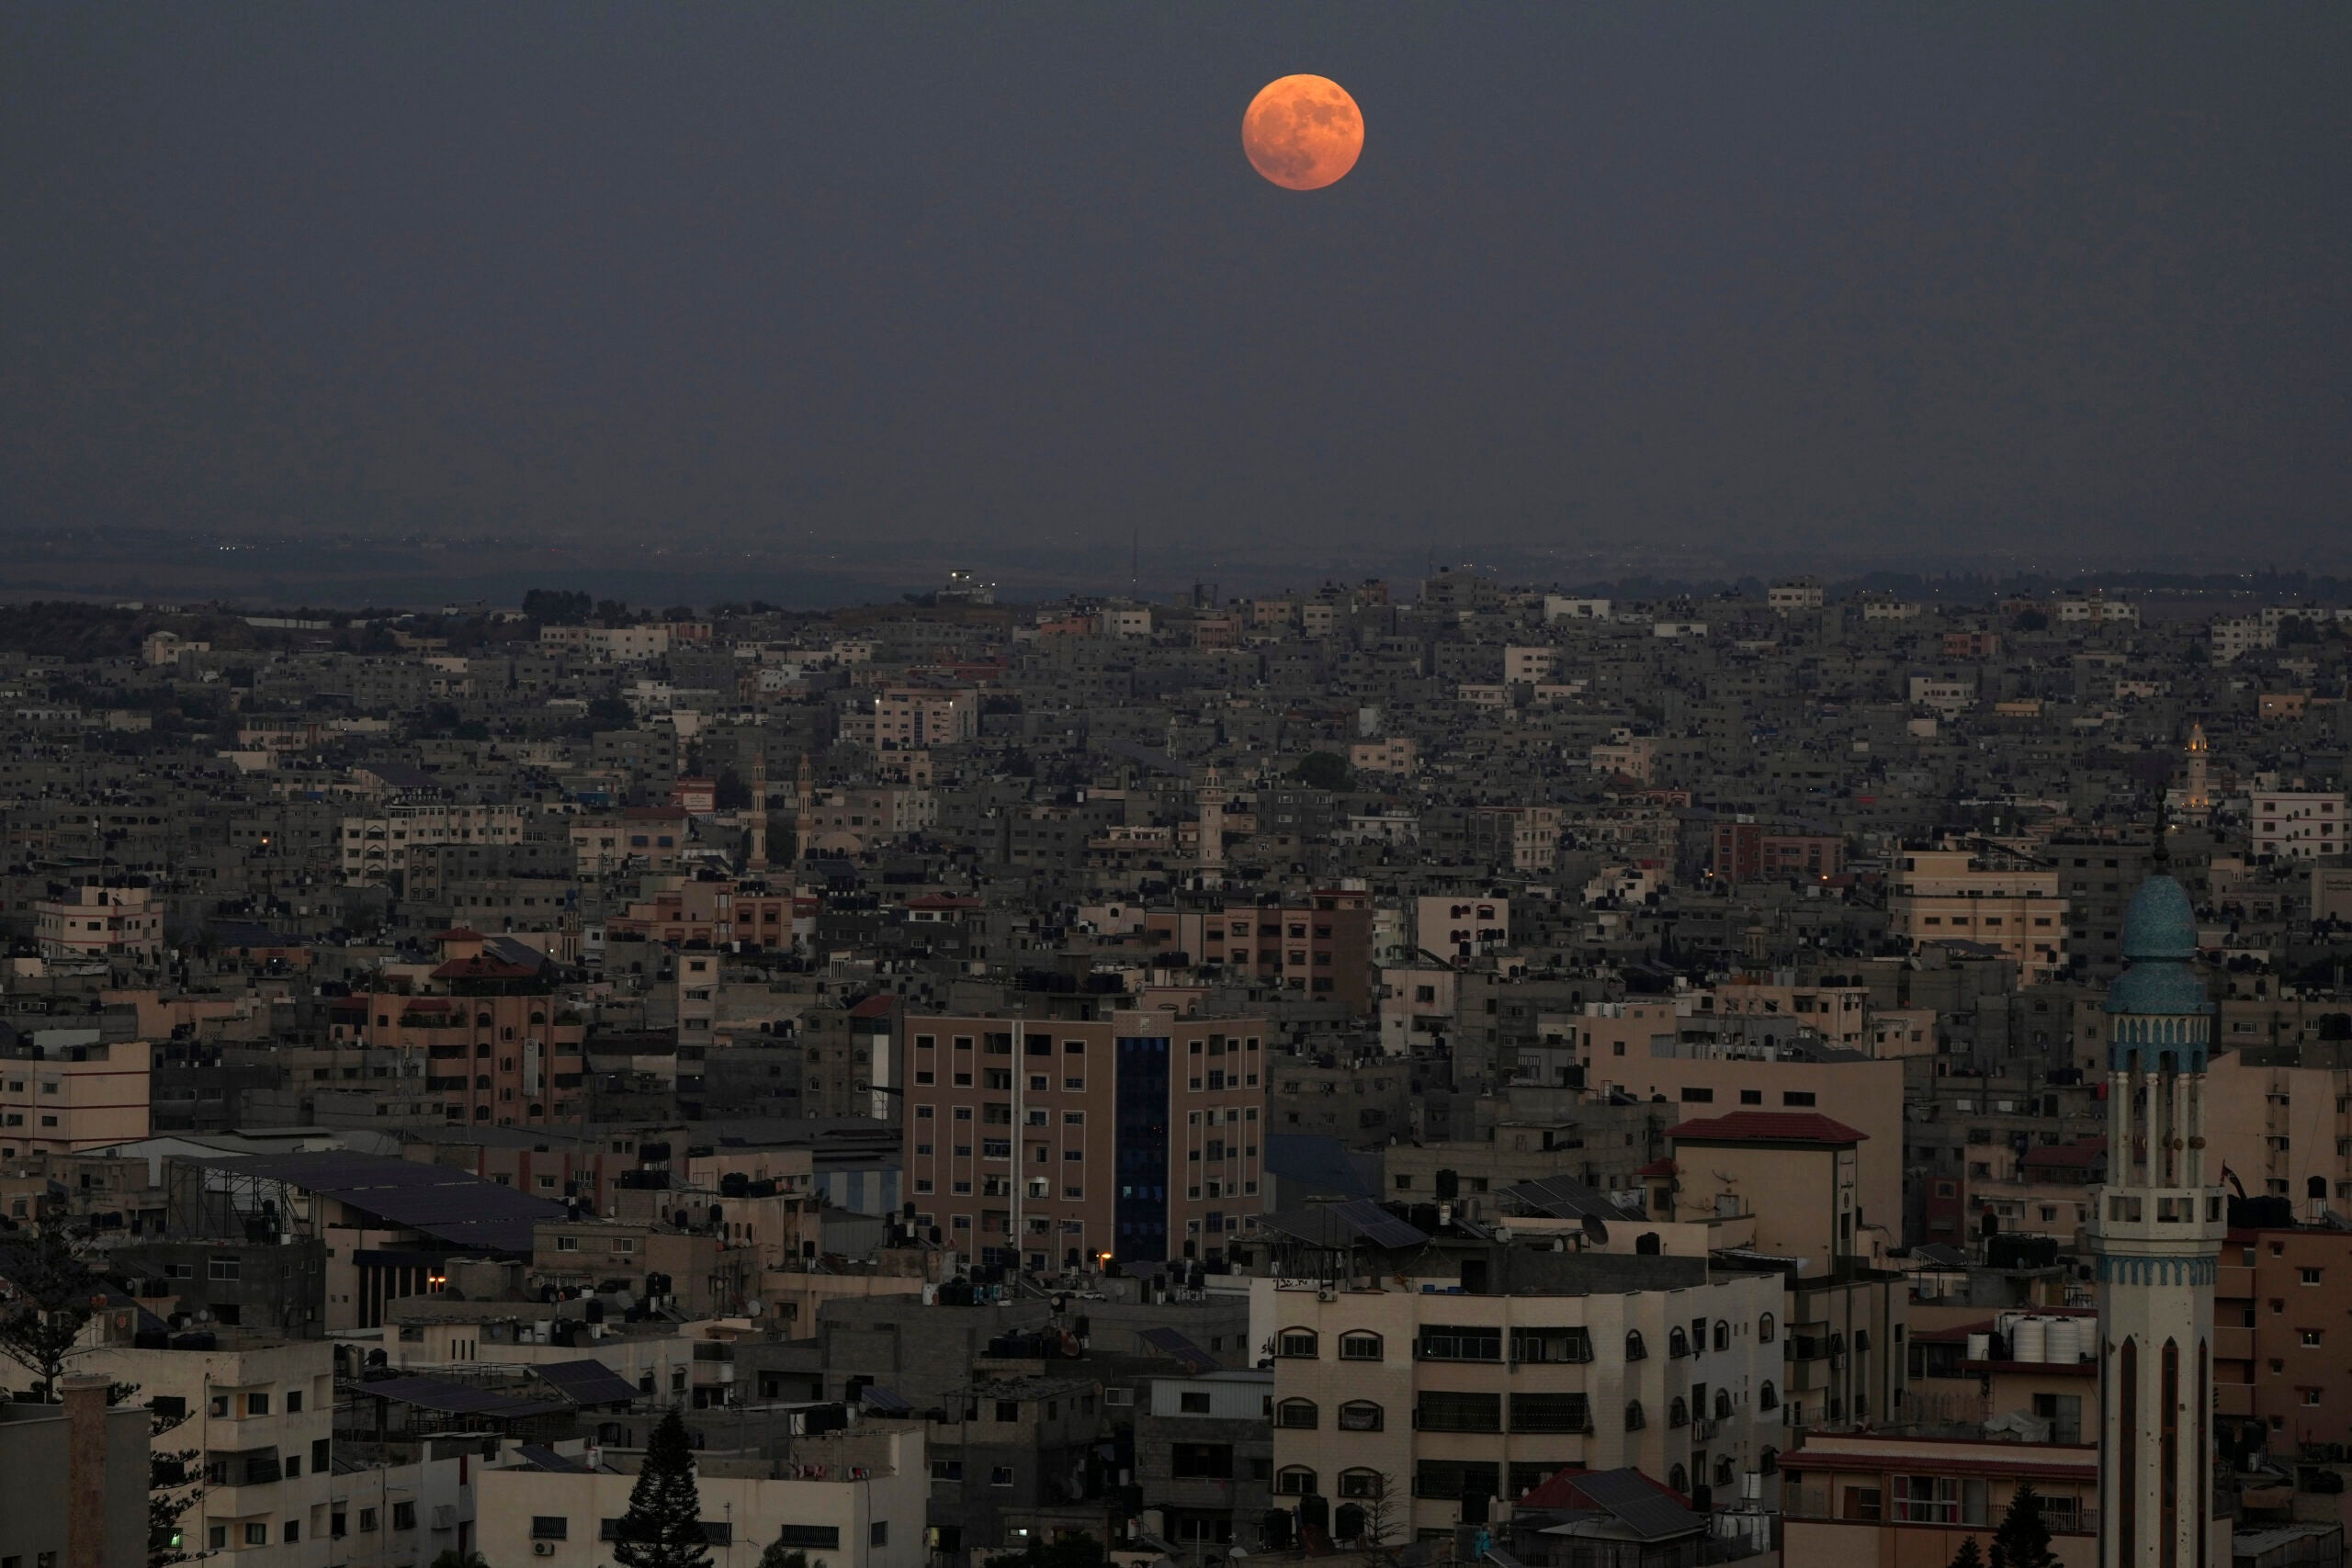 The supermoon rises in the sky over the houses of Gaza City.